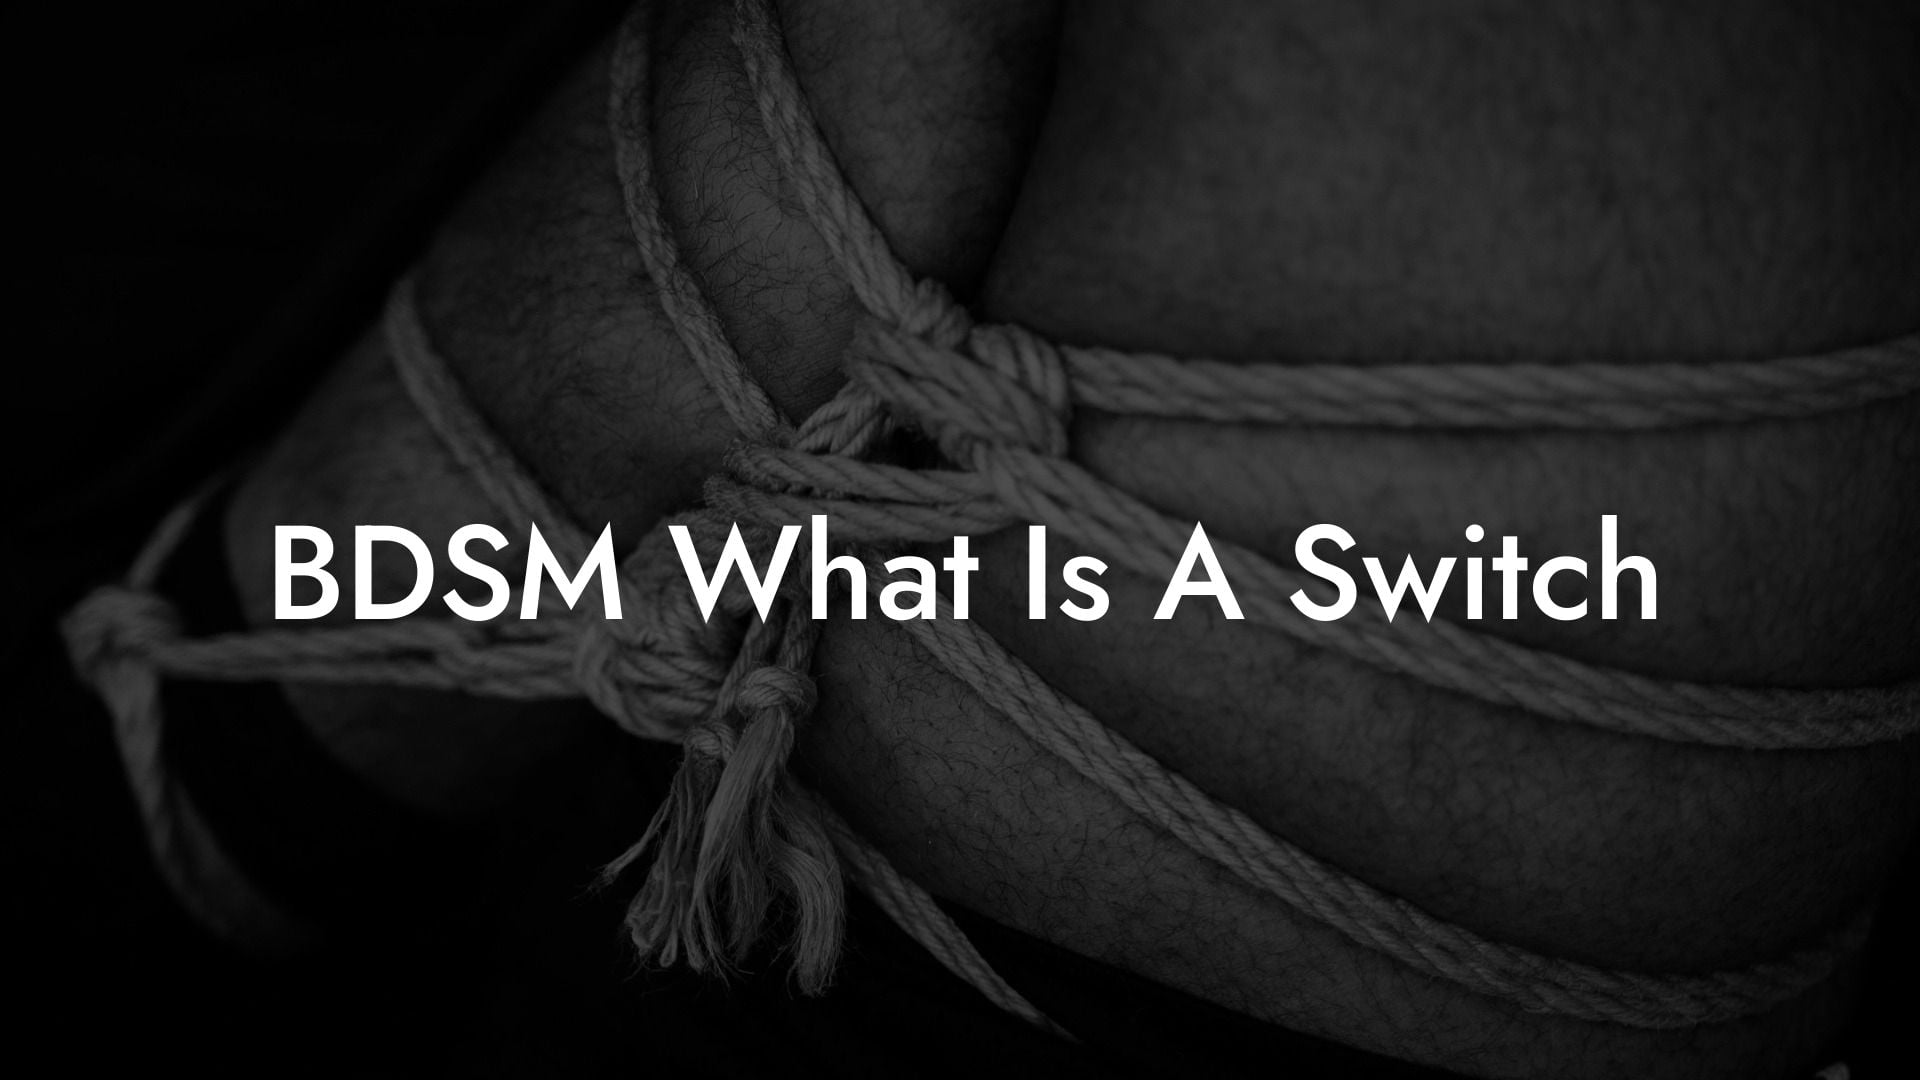 BDSM What Is A Switch